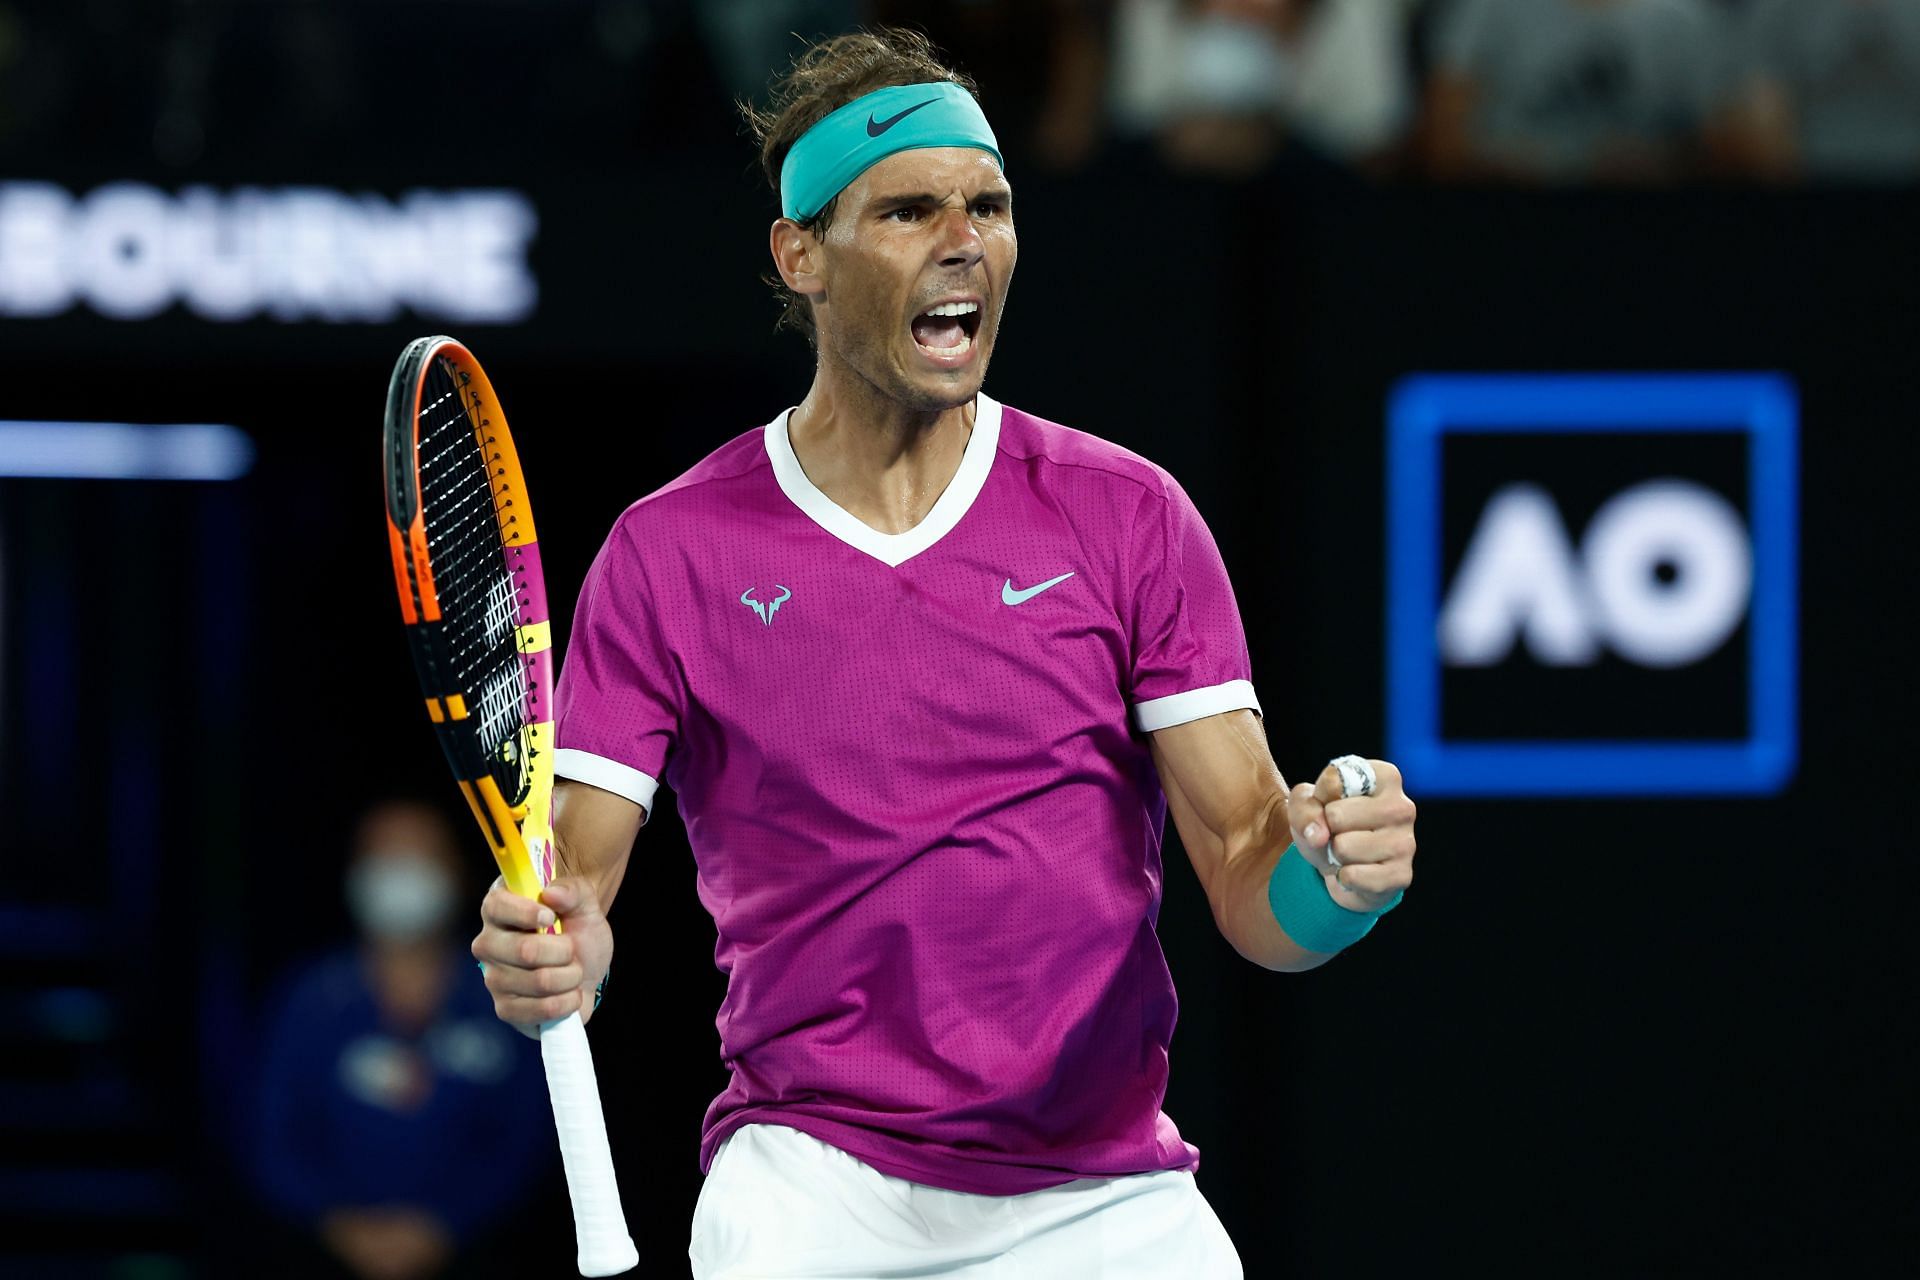 Rafael Nadal recorded his 74th victory against a top-10 player on hardcourt